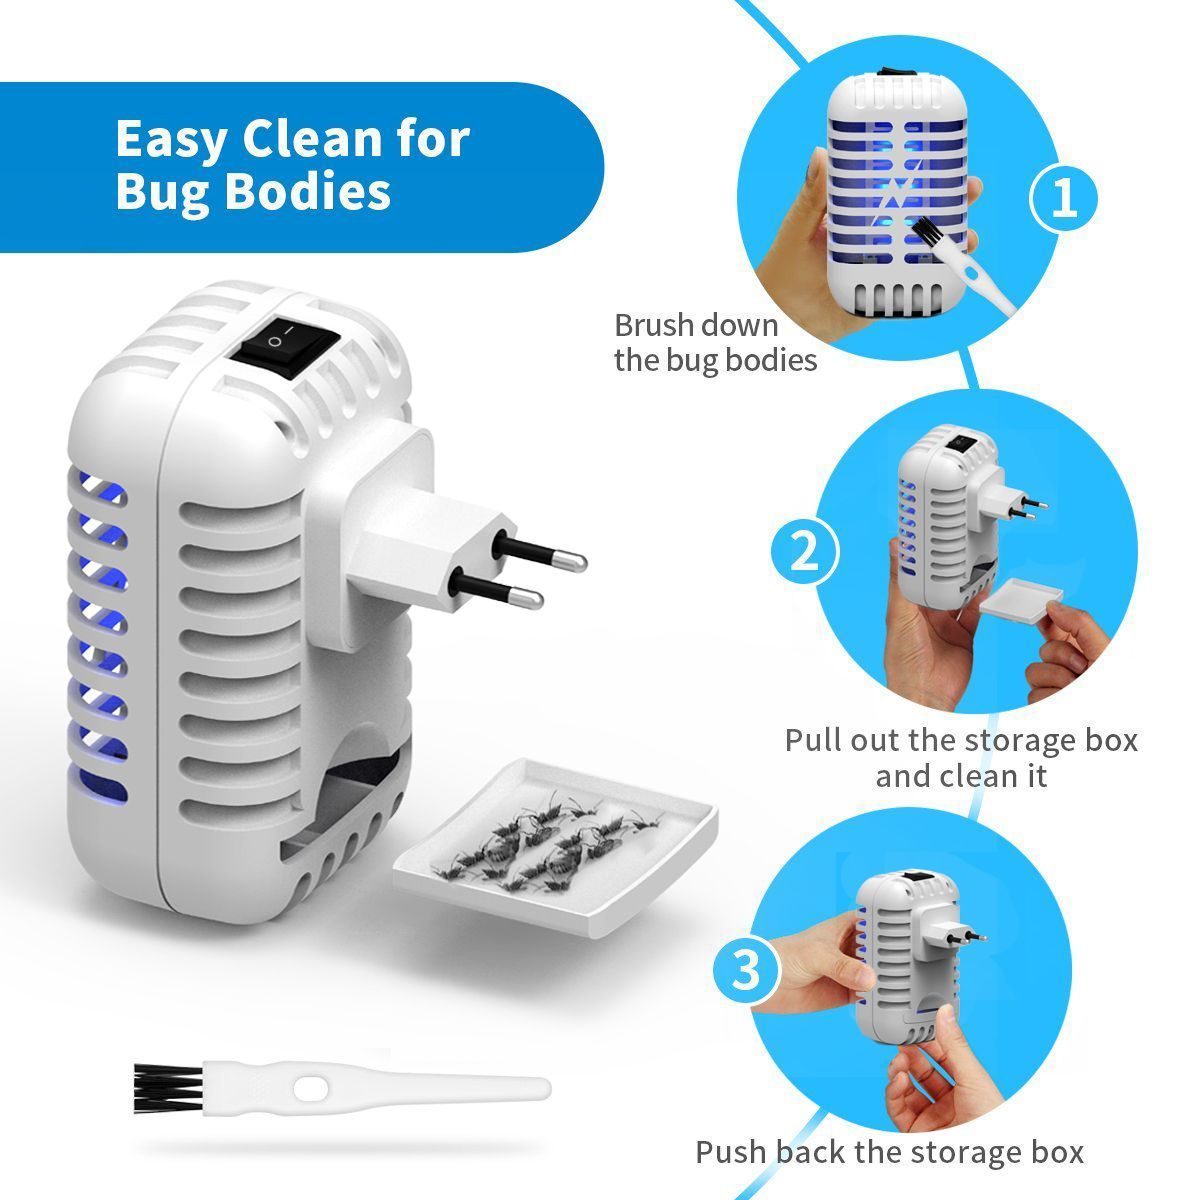 Household-2W-Electric-Mosquito-Killer-Lamp-360-400nm-UV-Light-Attracts-Flying-Insects-Bugs-Mini-LED--1698394